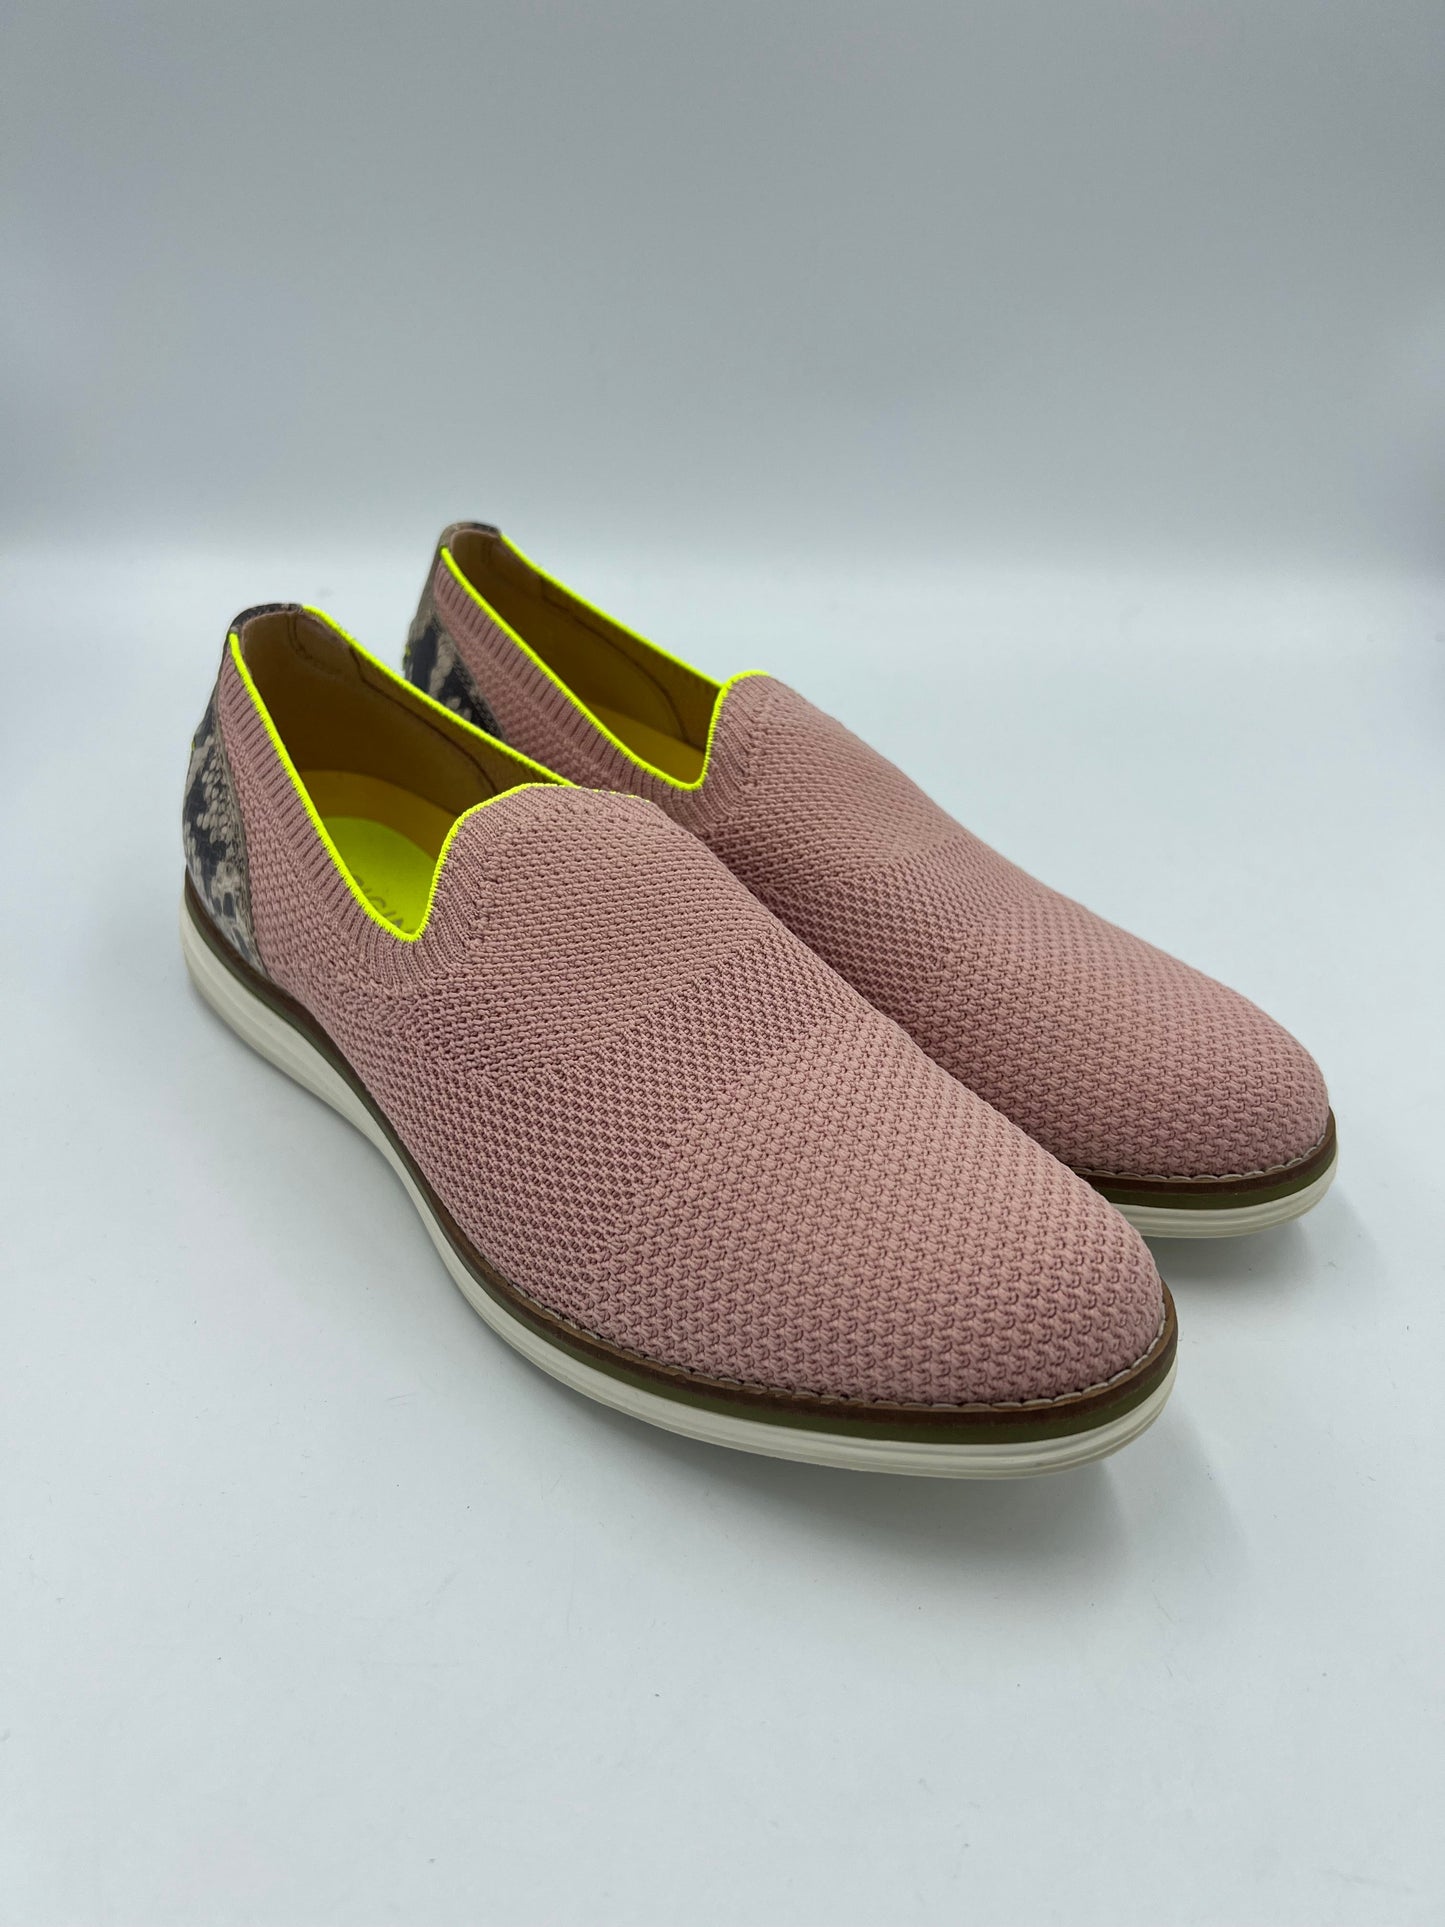 Shoes Designer By Cole-haan  Size: 11